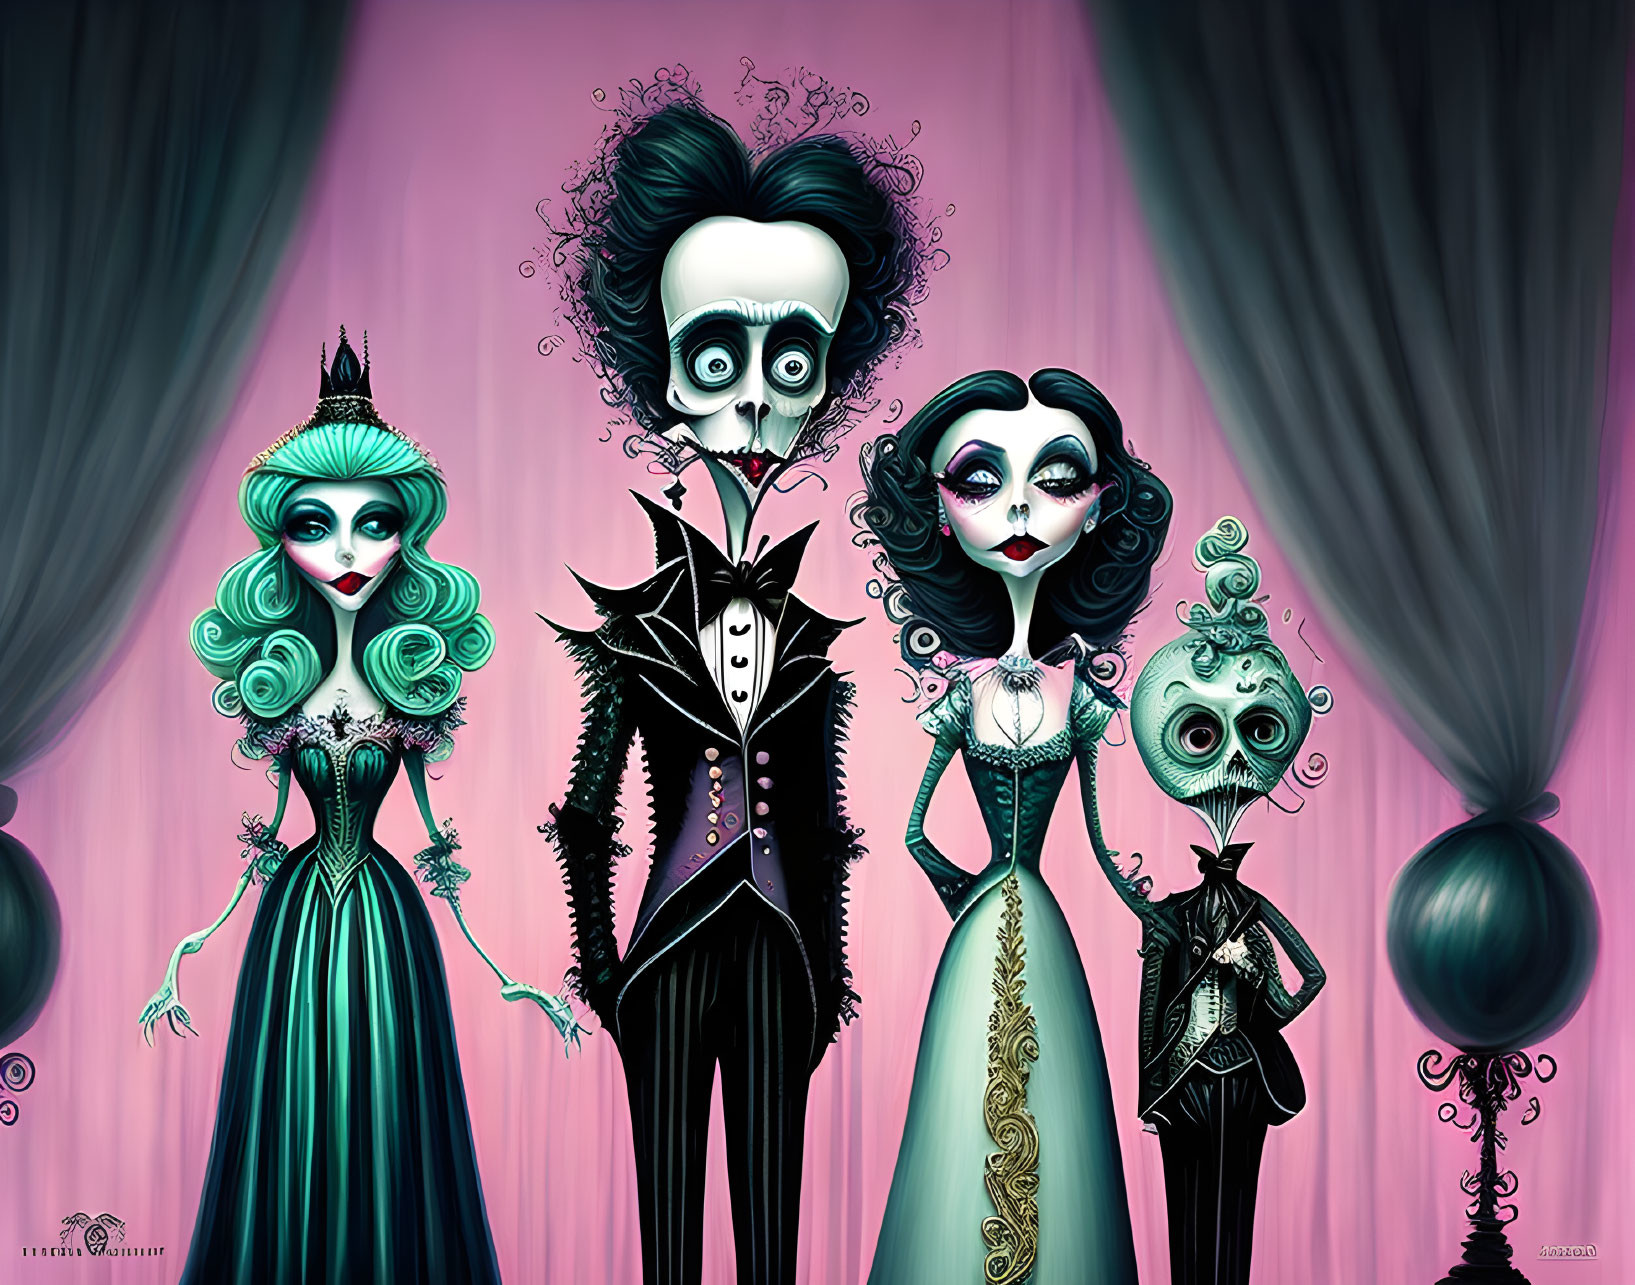 Stylized Gothic characters in Victorian attire on striped background